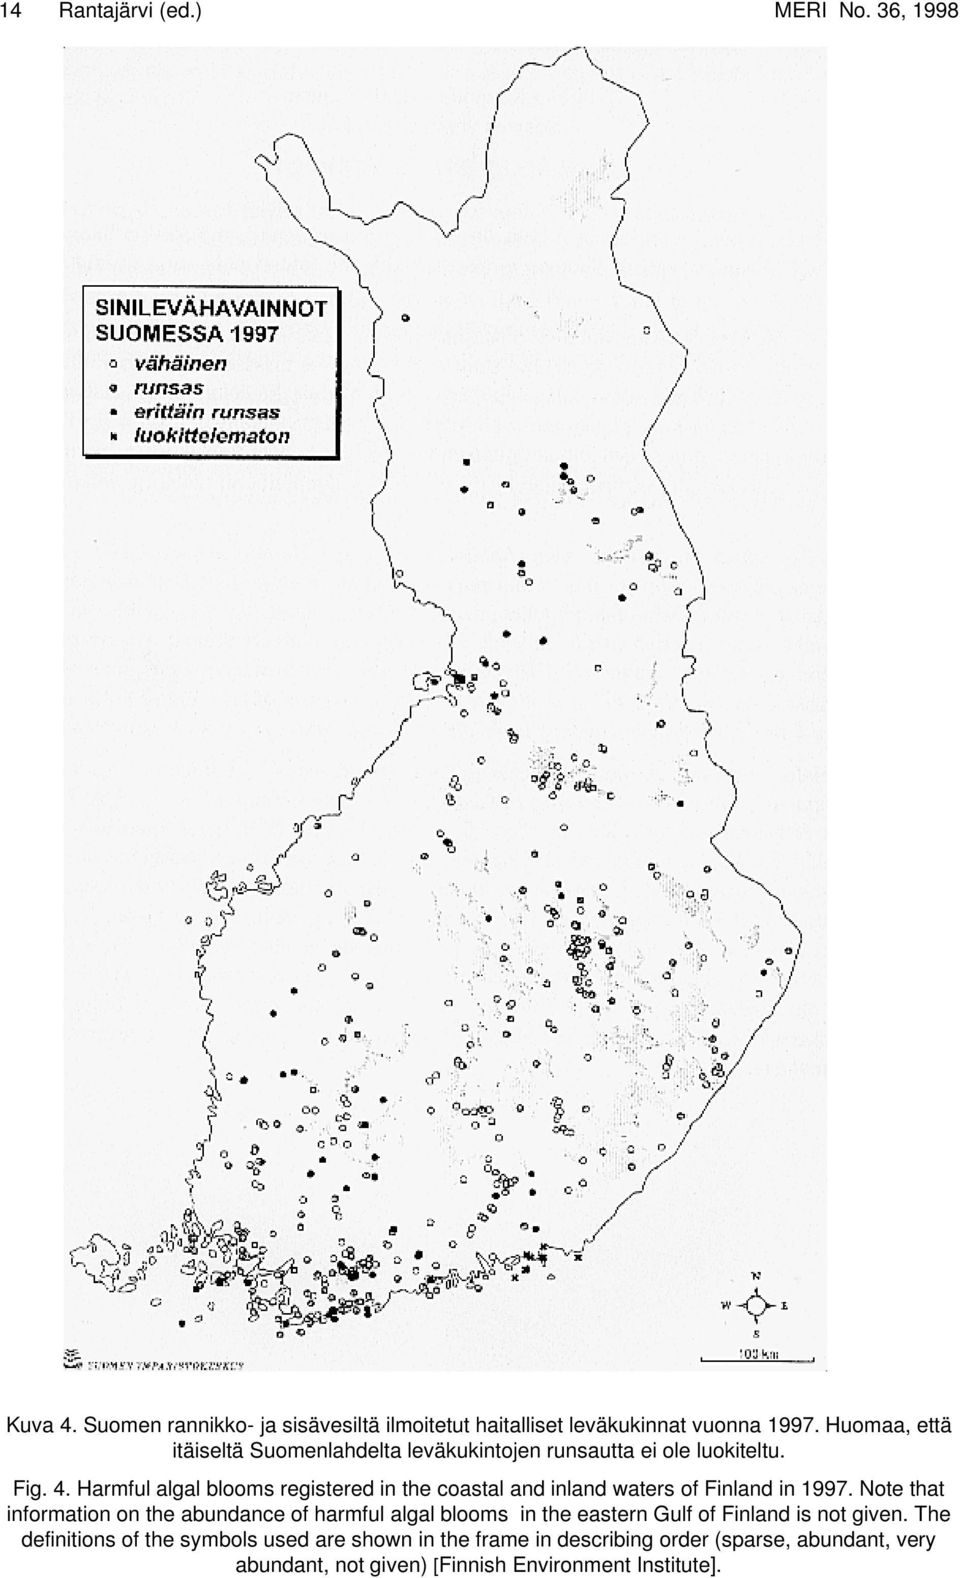 Harmful algal blooms registered in the coastal and inland waters of Finland in 1997.